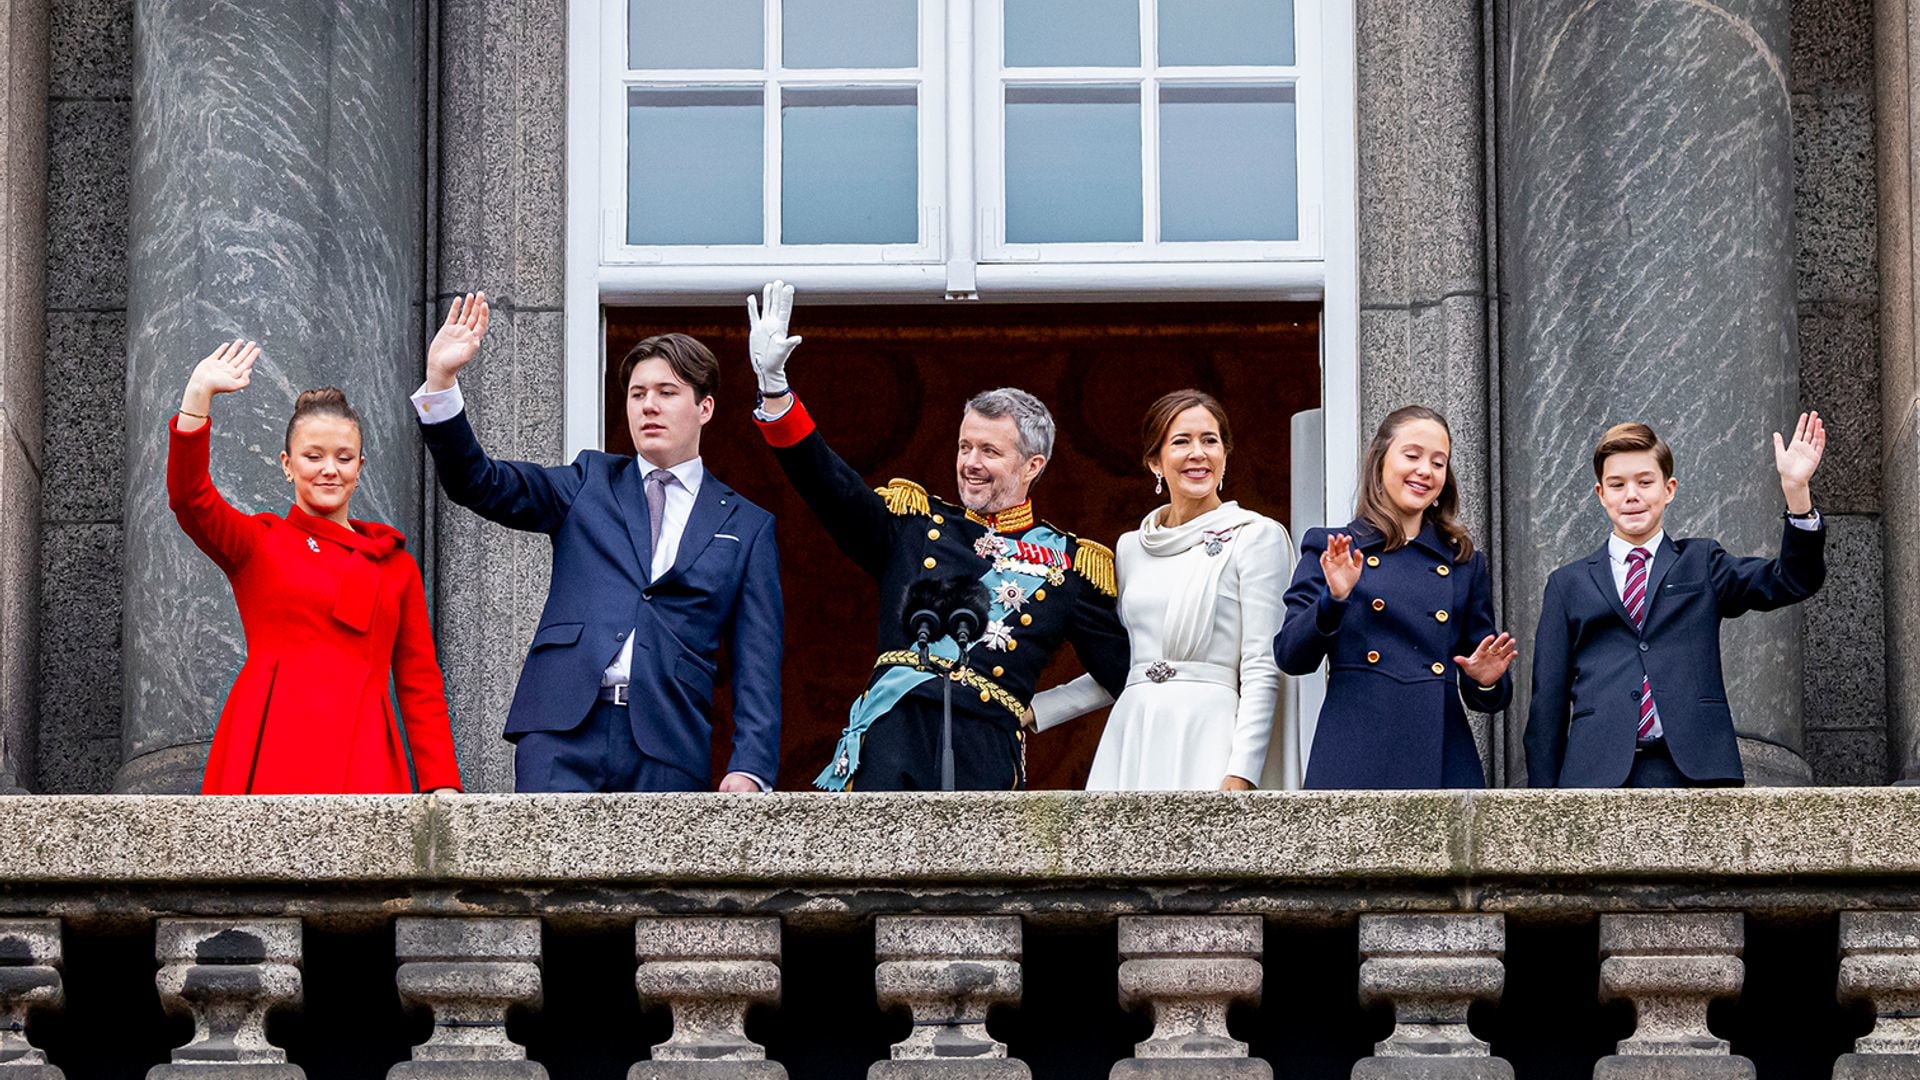 Princess Isabella, Prince Christian, King Frederik, Queen Mary, Princess Josephine and Prince Vincent waving